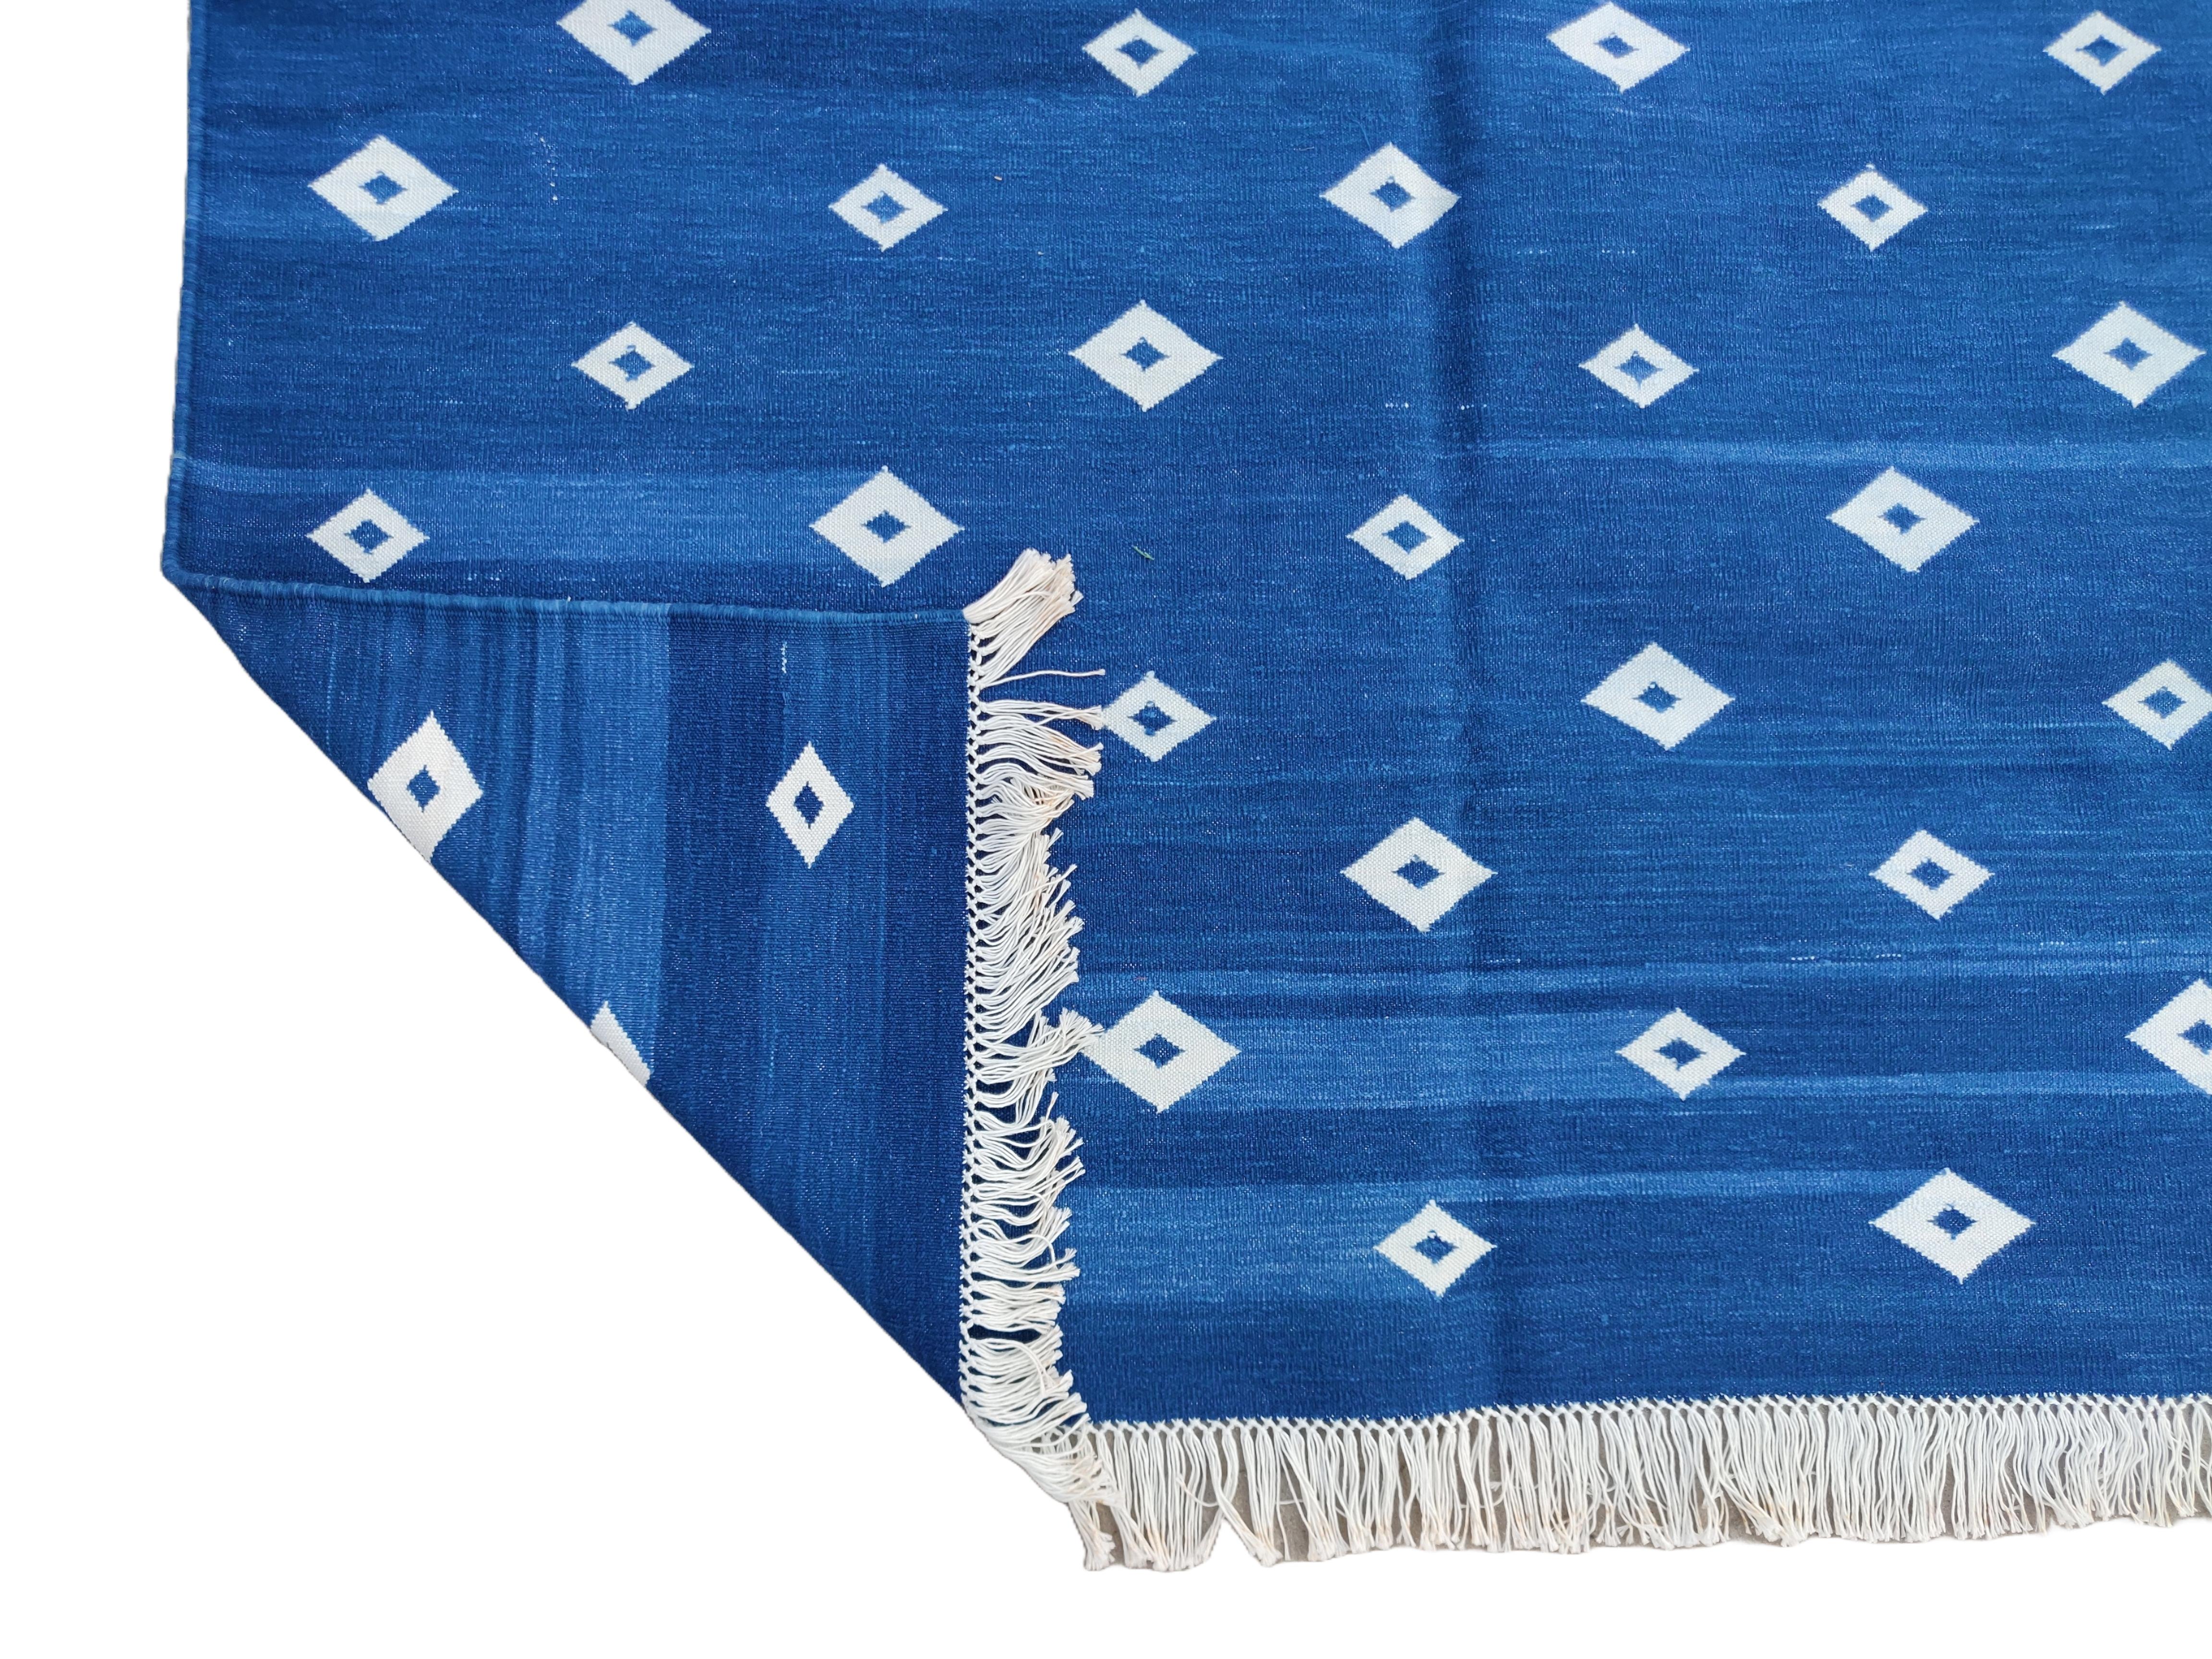 Handmade Cotton Area Flat Weave Rug, Blue & White Diamond Pattern Indian Dhurrie In New Condition For Sale In Jaipur, IN